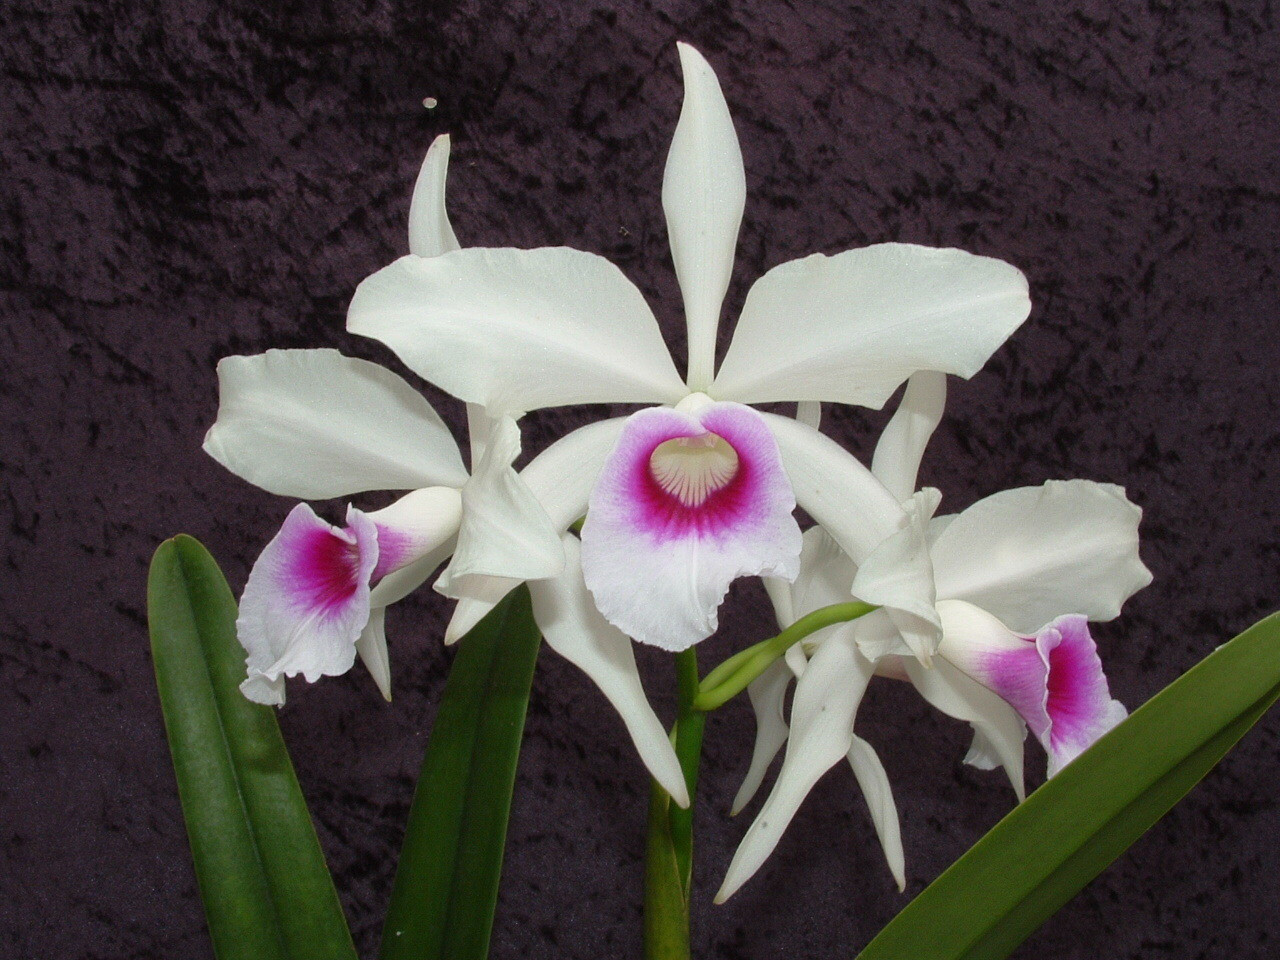 Laelia purpurata 'argolao' | Orchideen-Wichmann.de - Highest horticultural  quality and experience since 1897